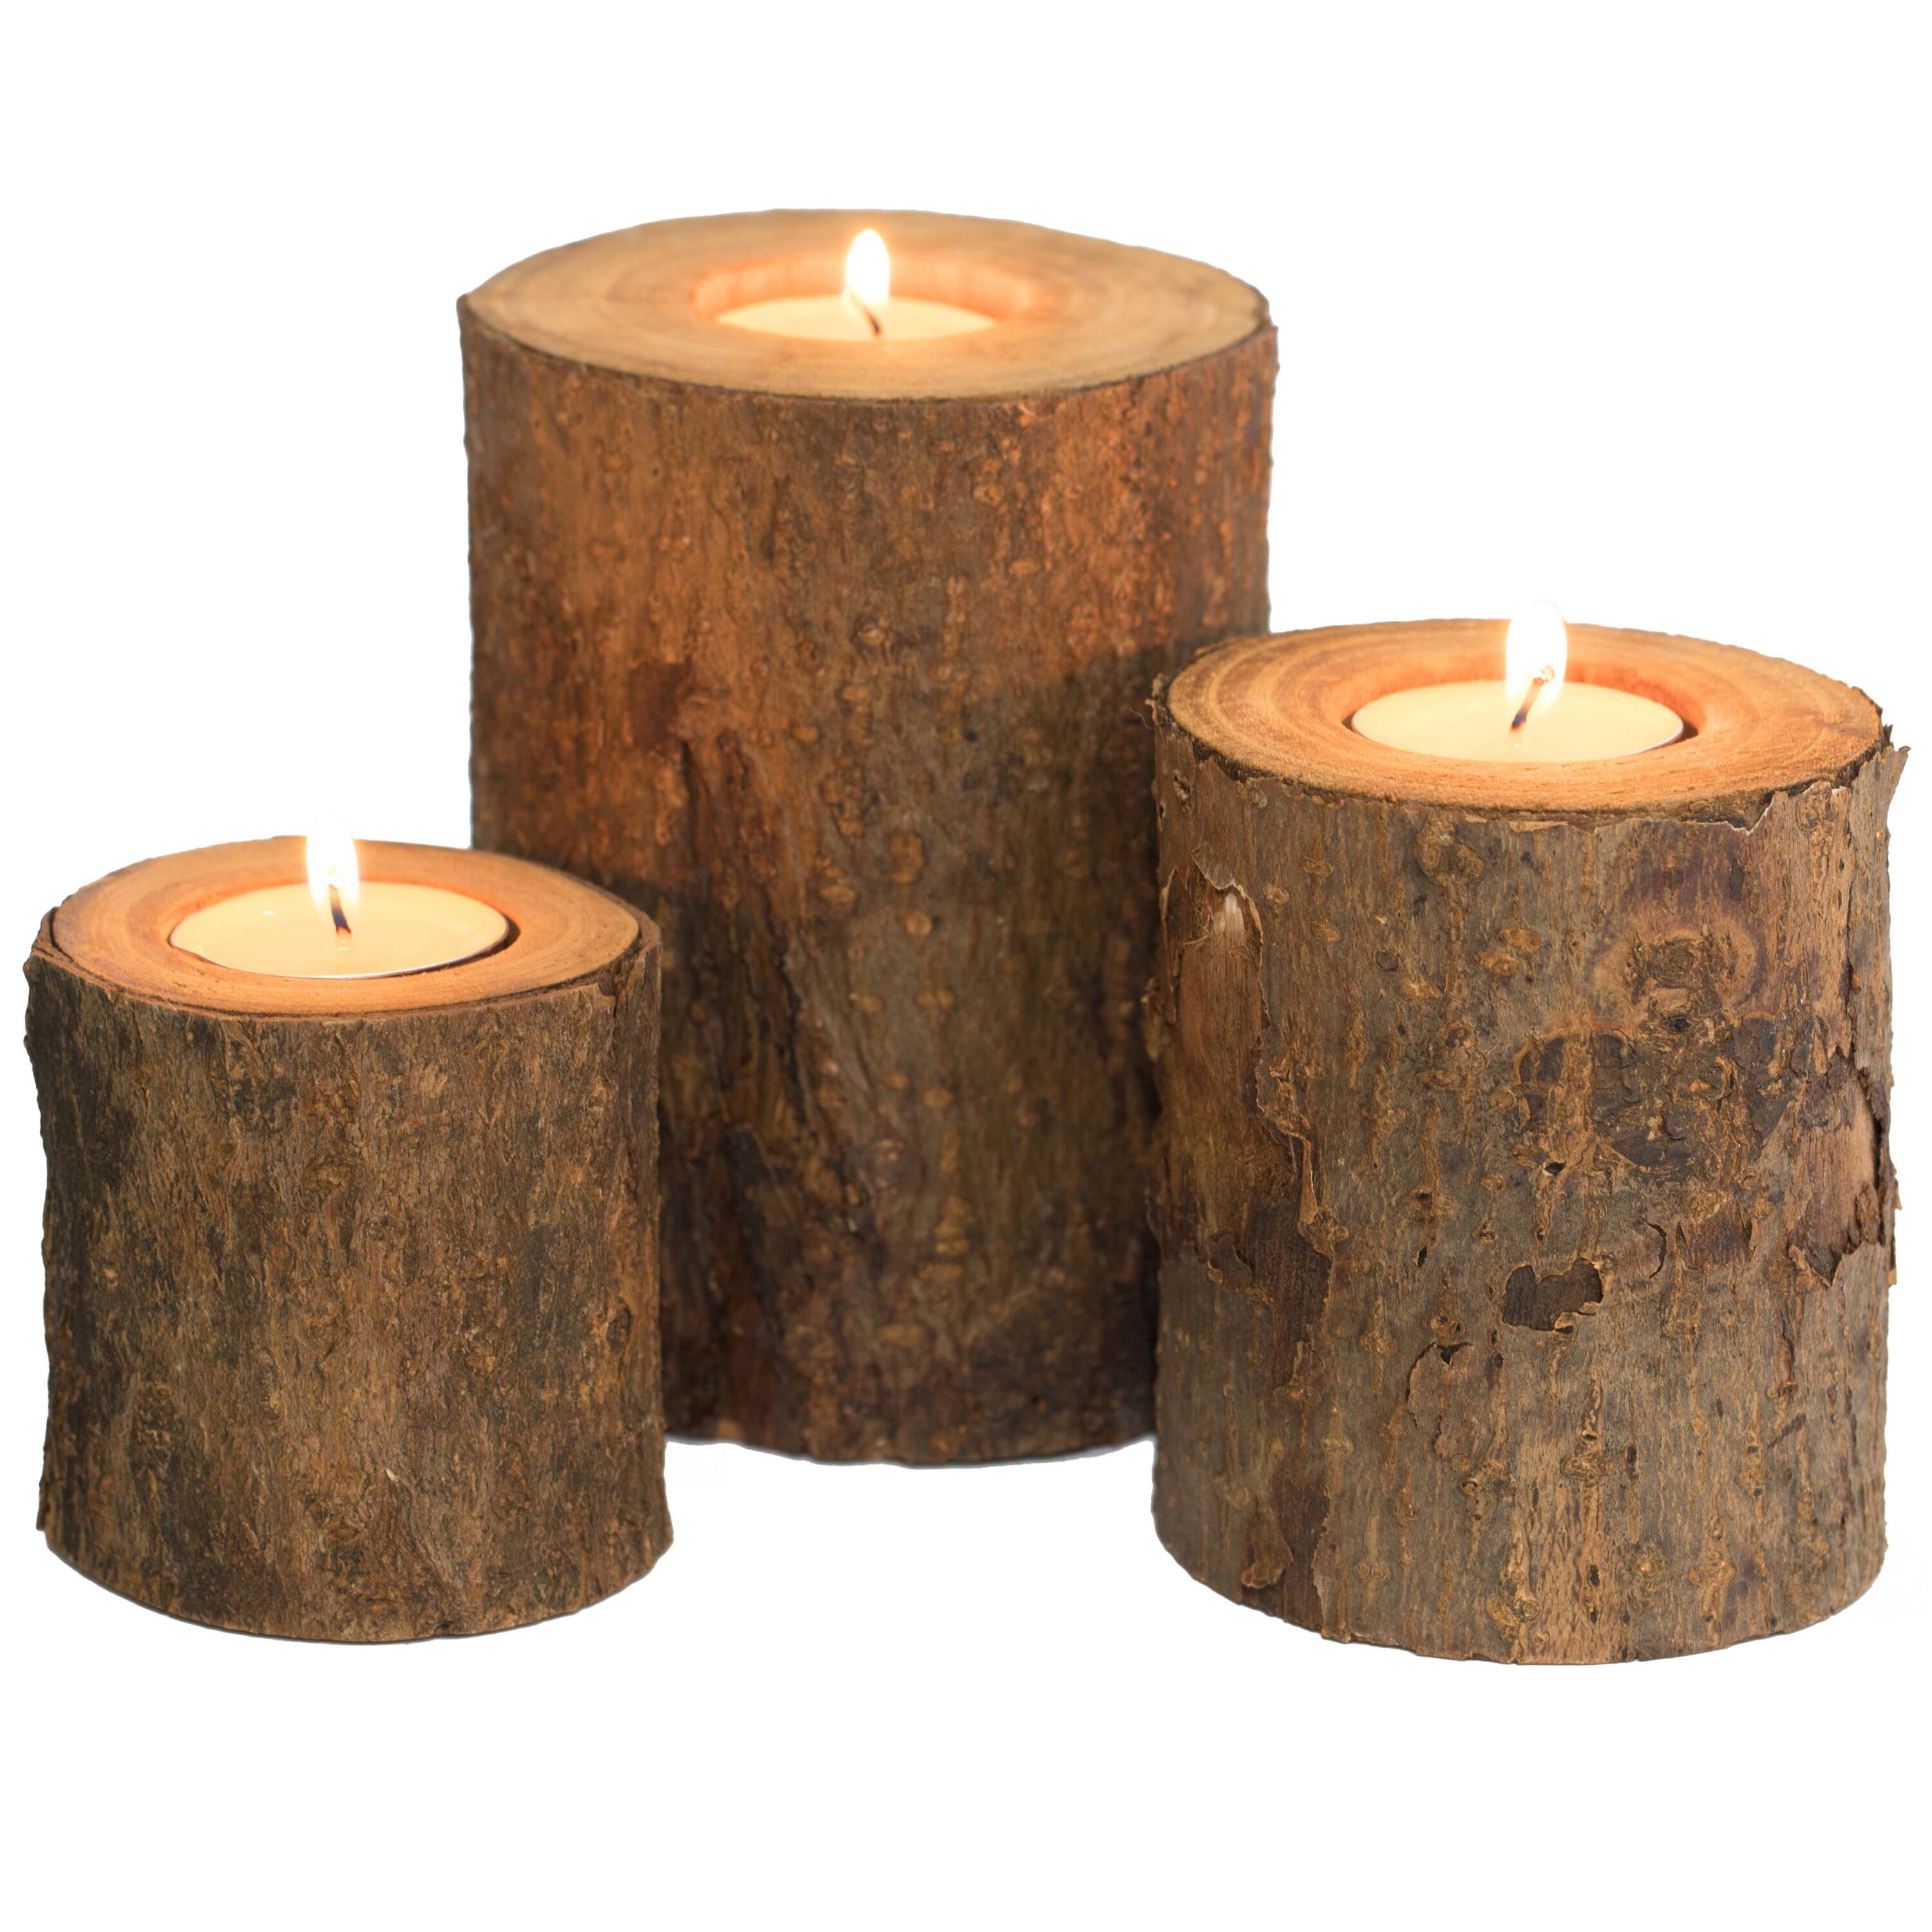 Vintiquewise Rustic Wooden Tree Stump Tea Light Candle Holder Set of 3,  Brown, Rustic Style, Indoor Use, Dimensions: Large- 3.75 In Dia x 5.25 In H